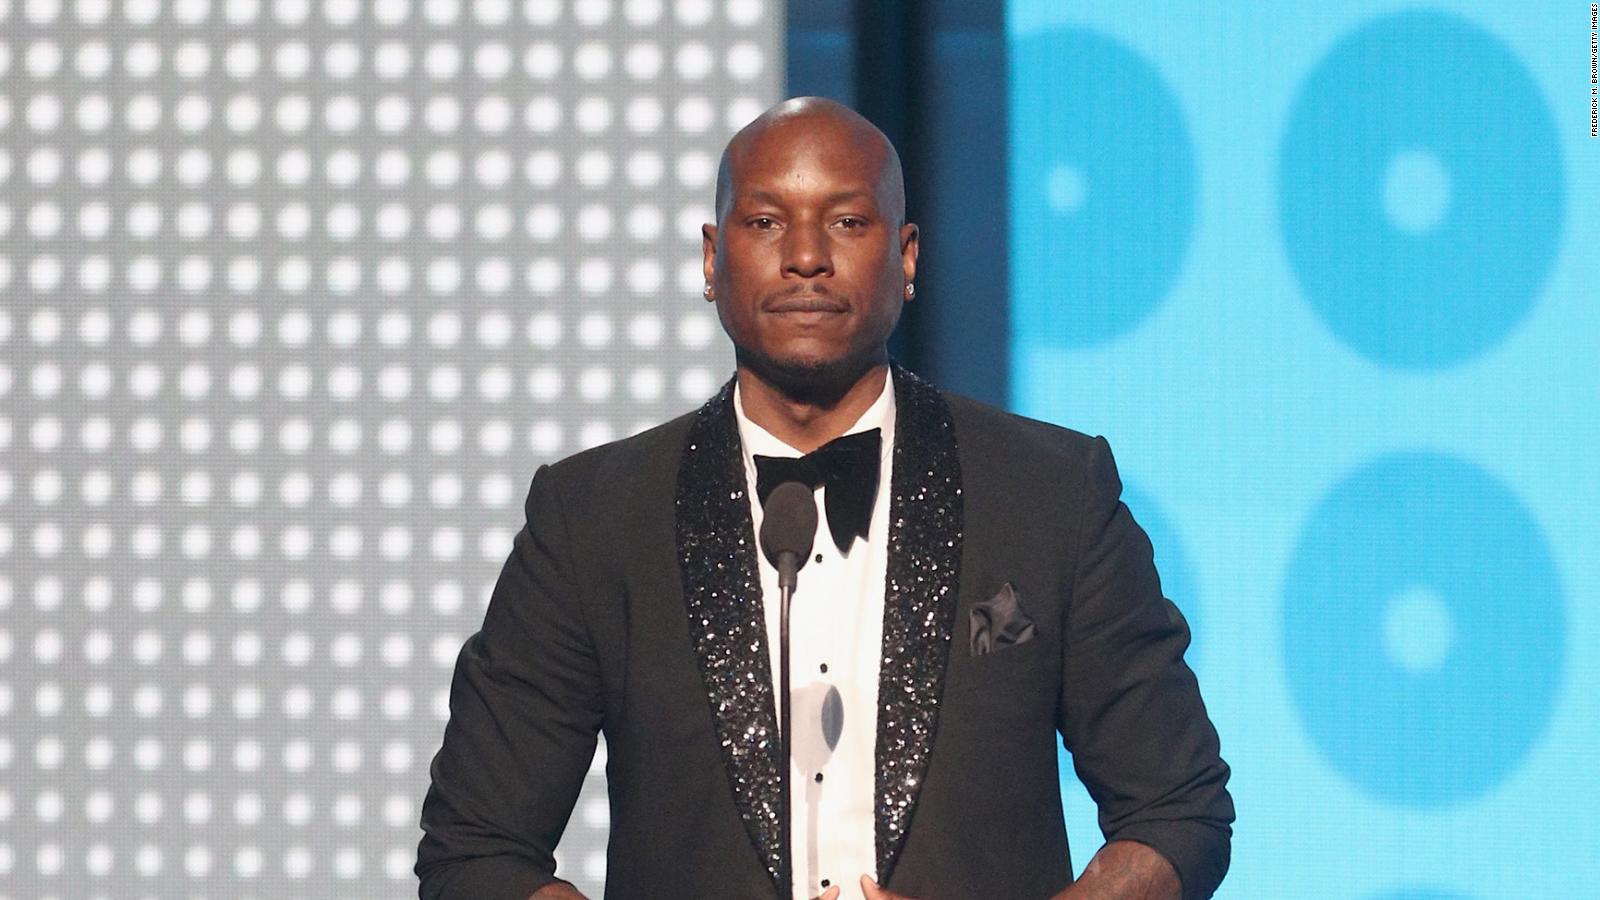 Happy Birthday to Tyrese Gibson who turns 39 today! 